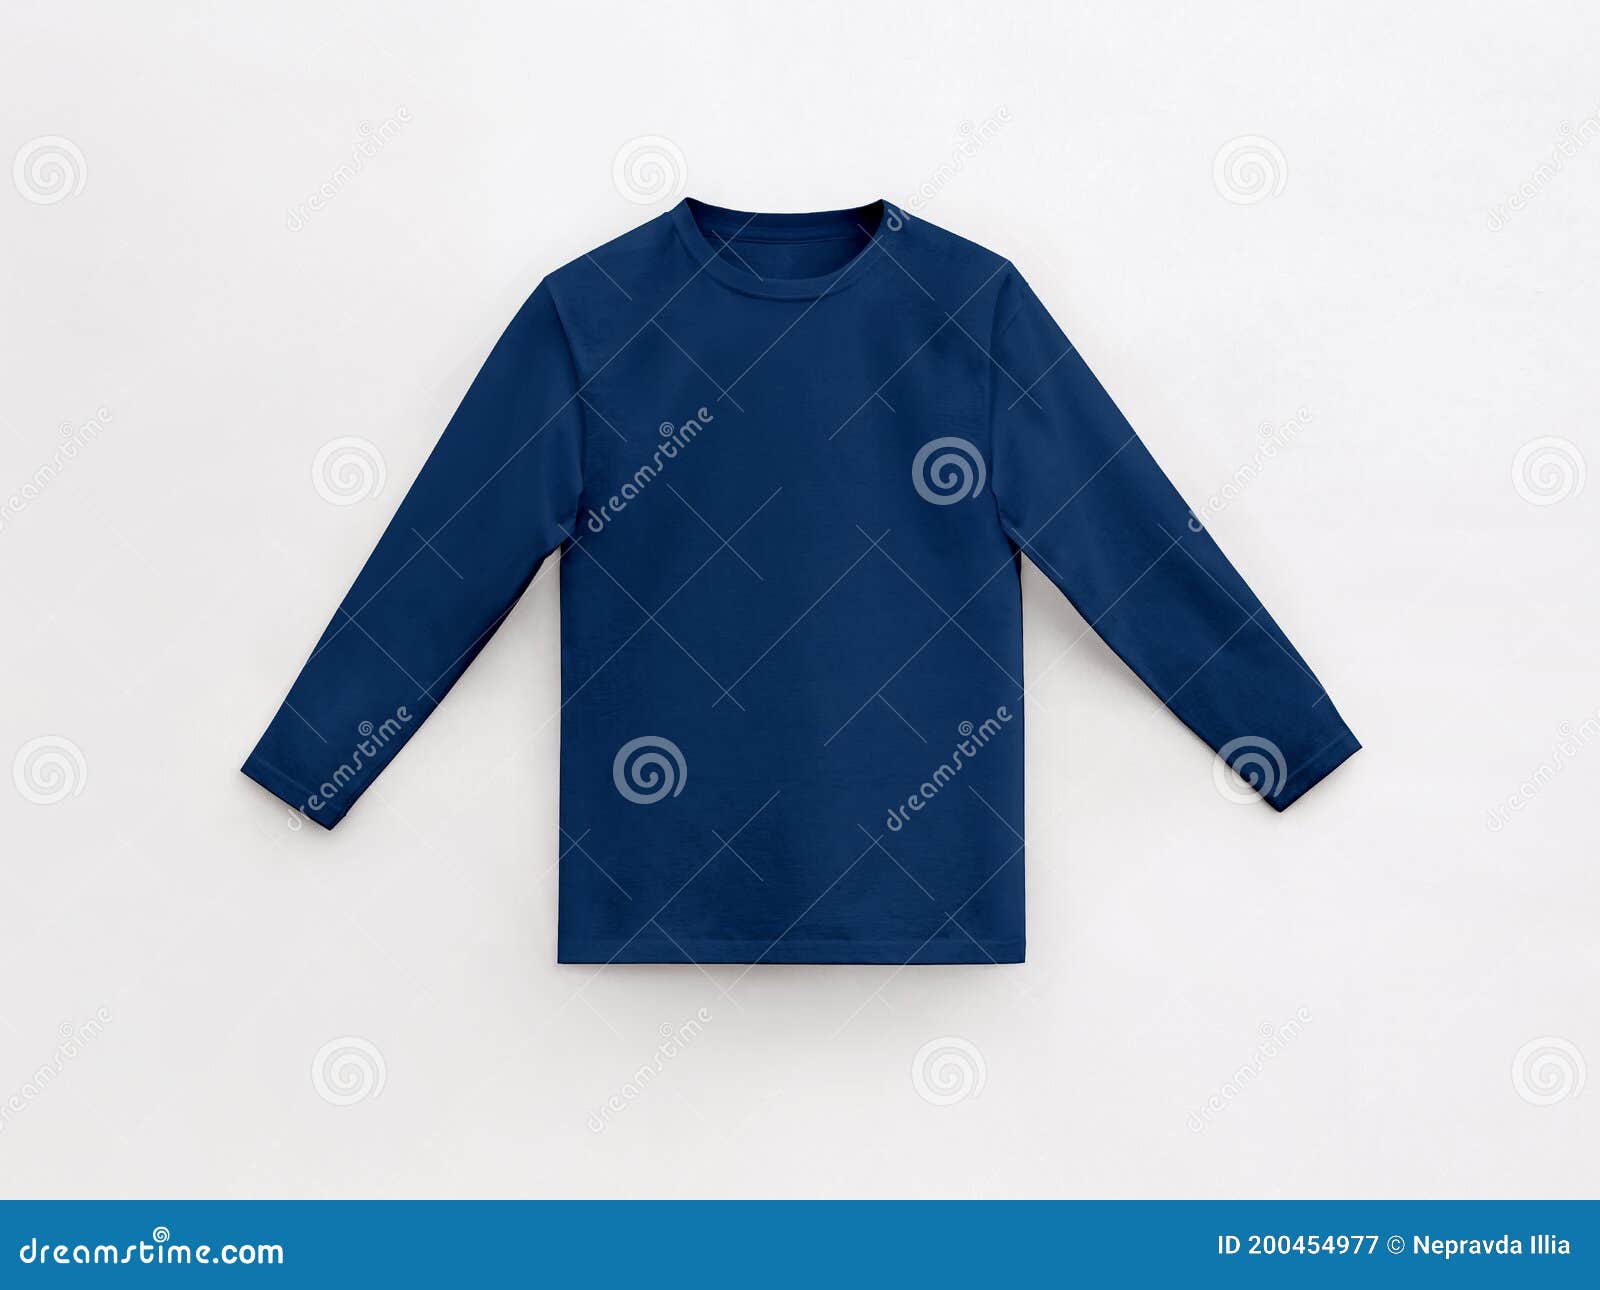 Download 130 Navy Blue Shirt Mockup Photos Free Royalty Free Stock Photos From Dreamstime